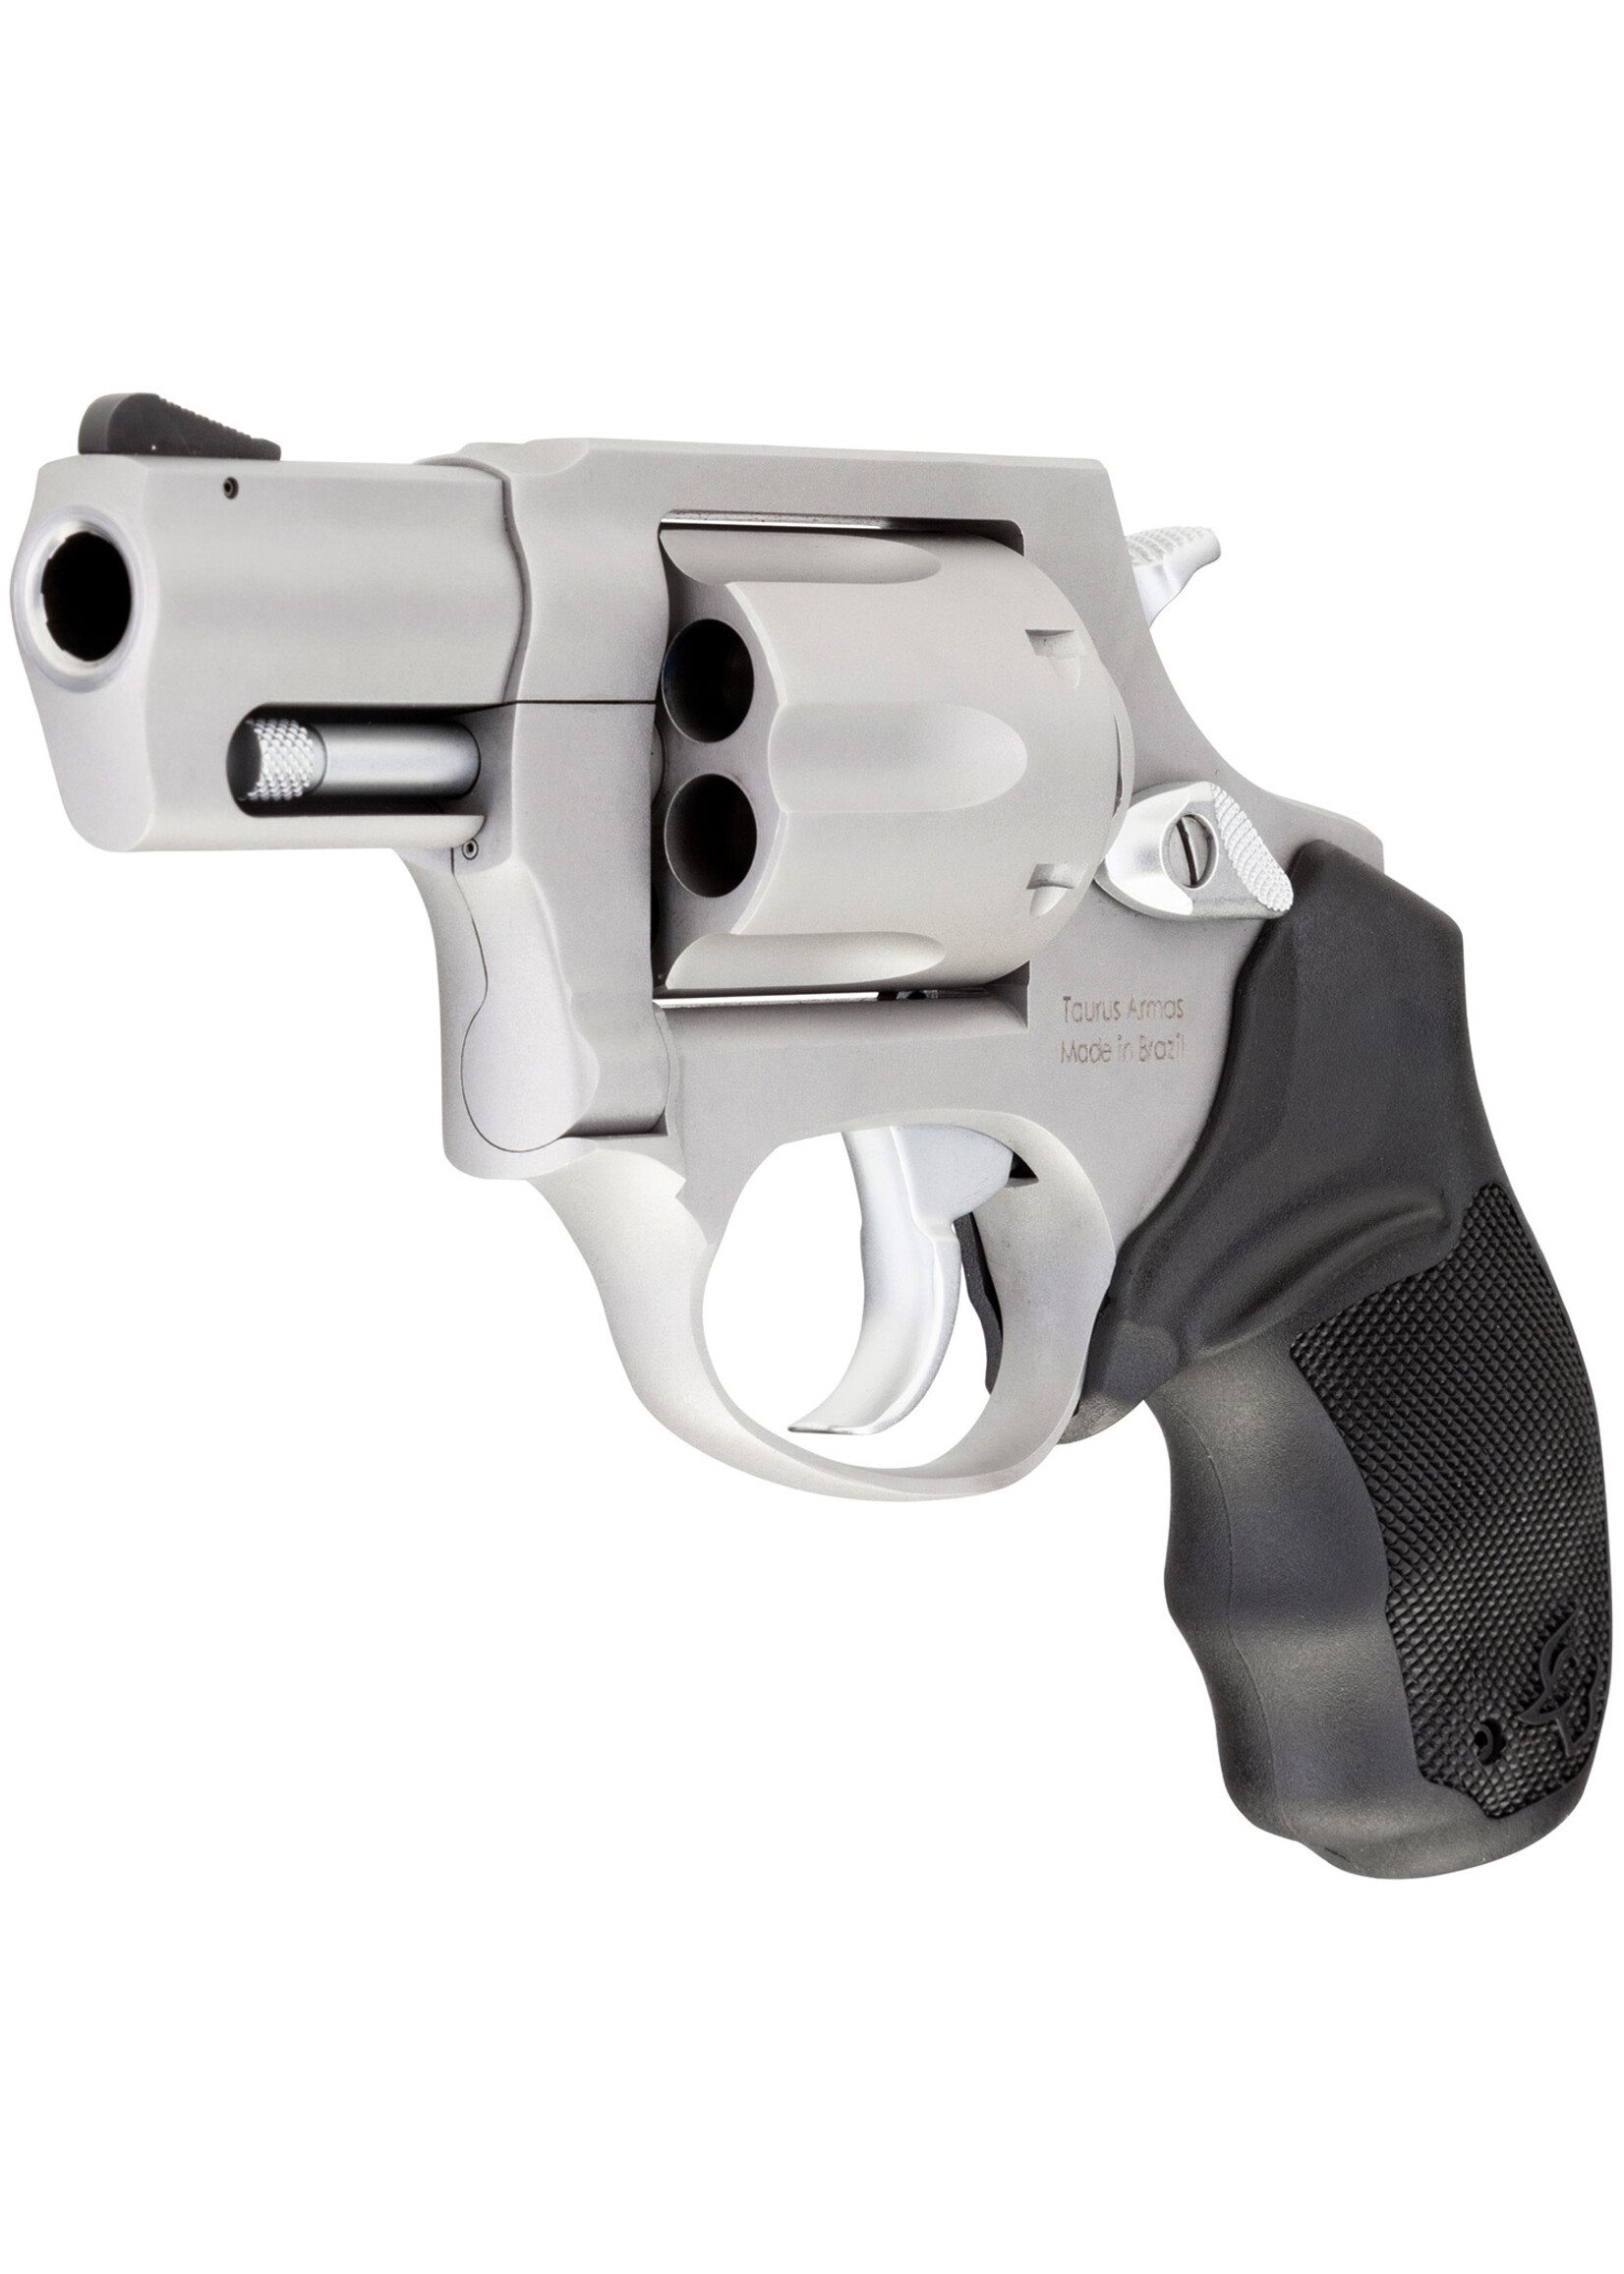 Taurus Taurus 285629 856 *CA Compliant 38 Special +P Caliber with 2" Barrel, 6rd Capacity Cylinder, Overall Matte Finish Stainless Steel & Finger Grooved Black Rubber Grip